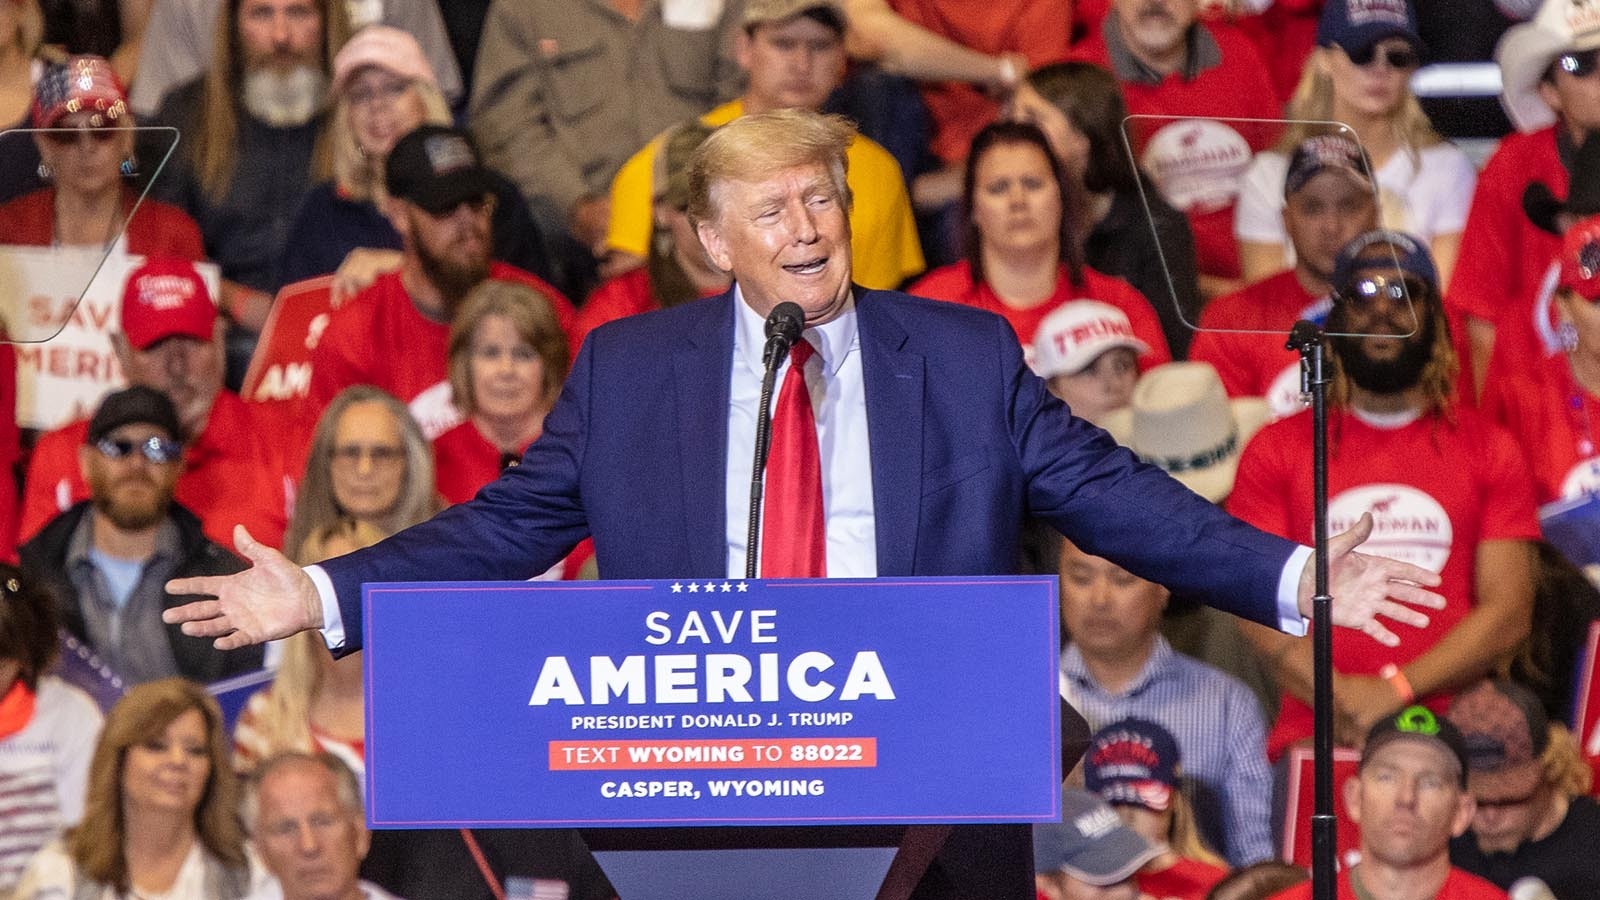 Former President Donald Trump during a Save America rally in Casper, Wyoming, on May 28, 2022.